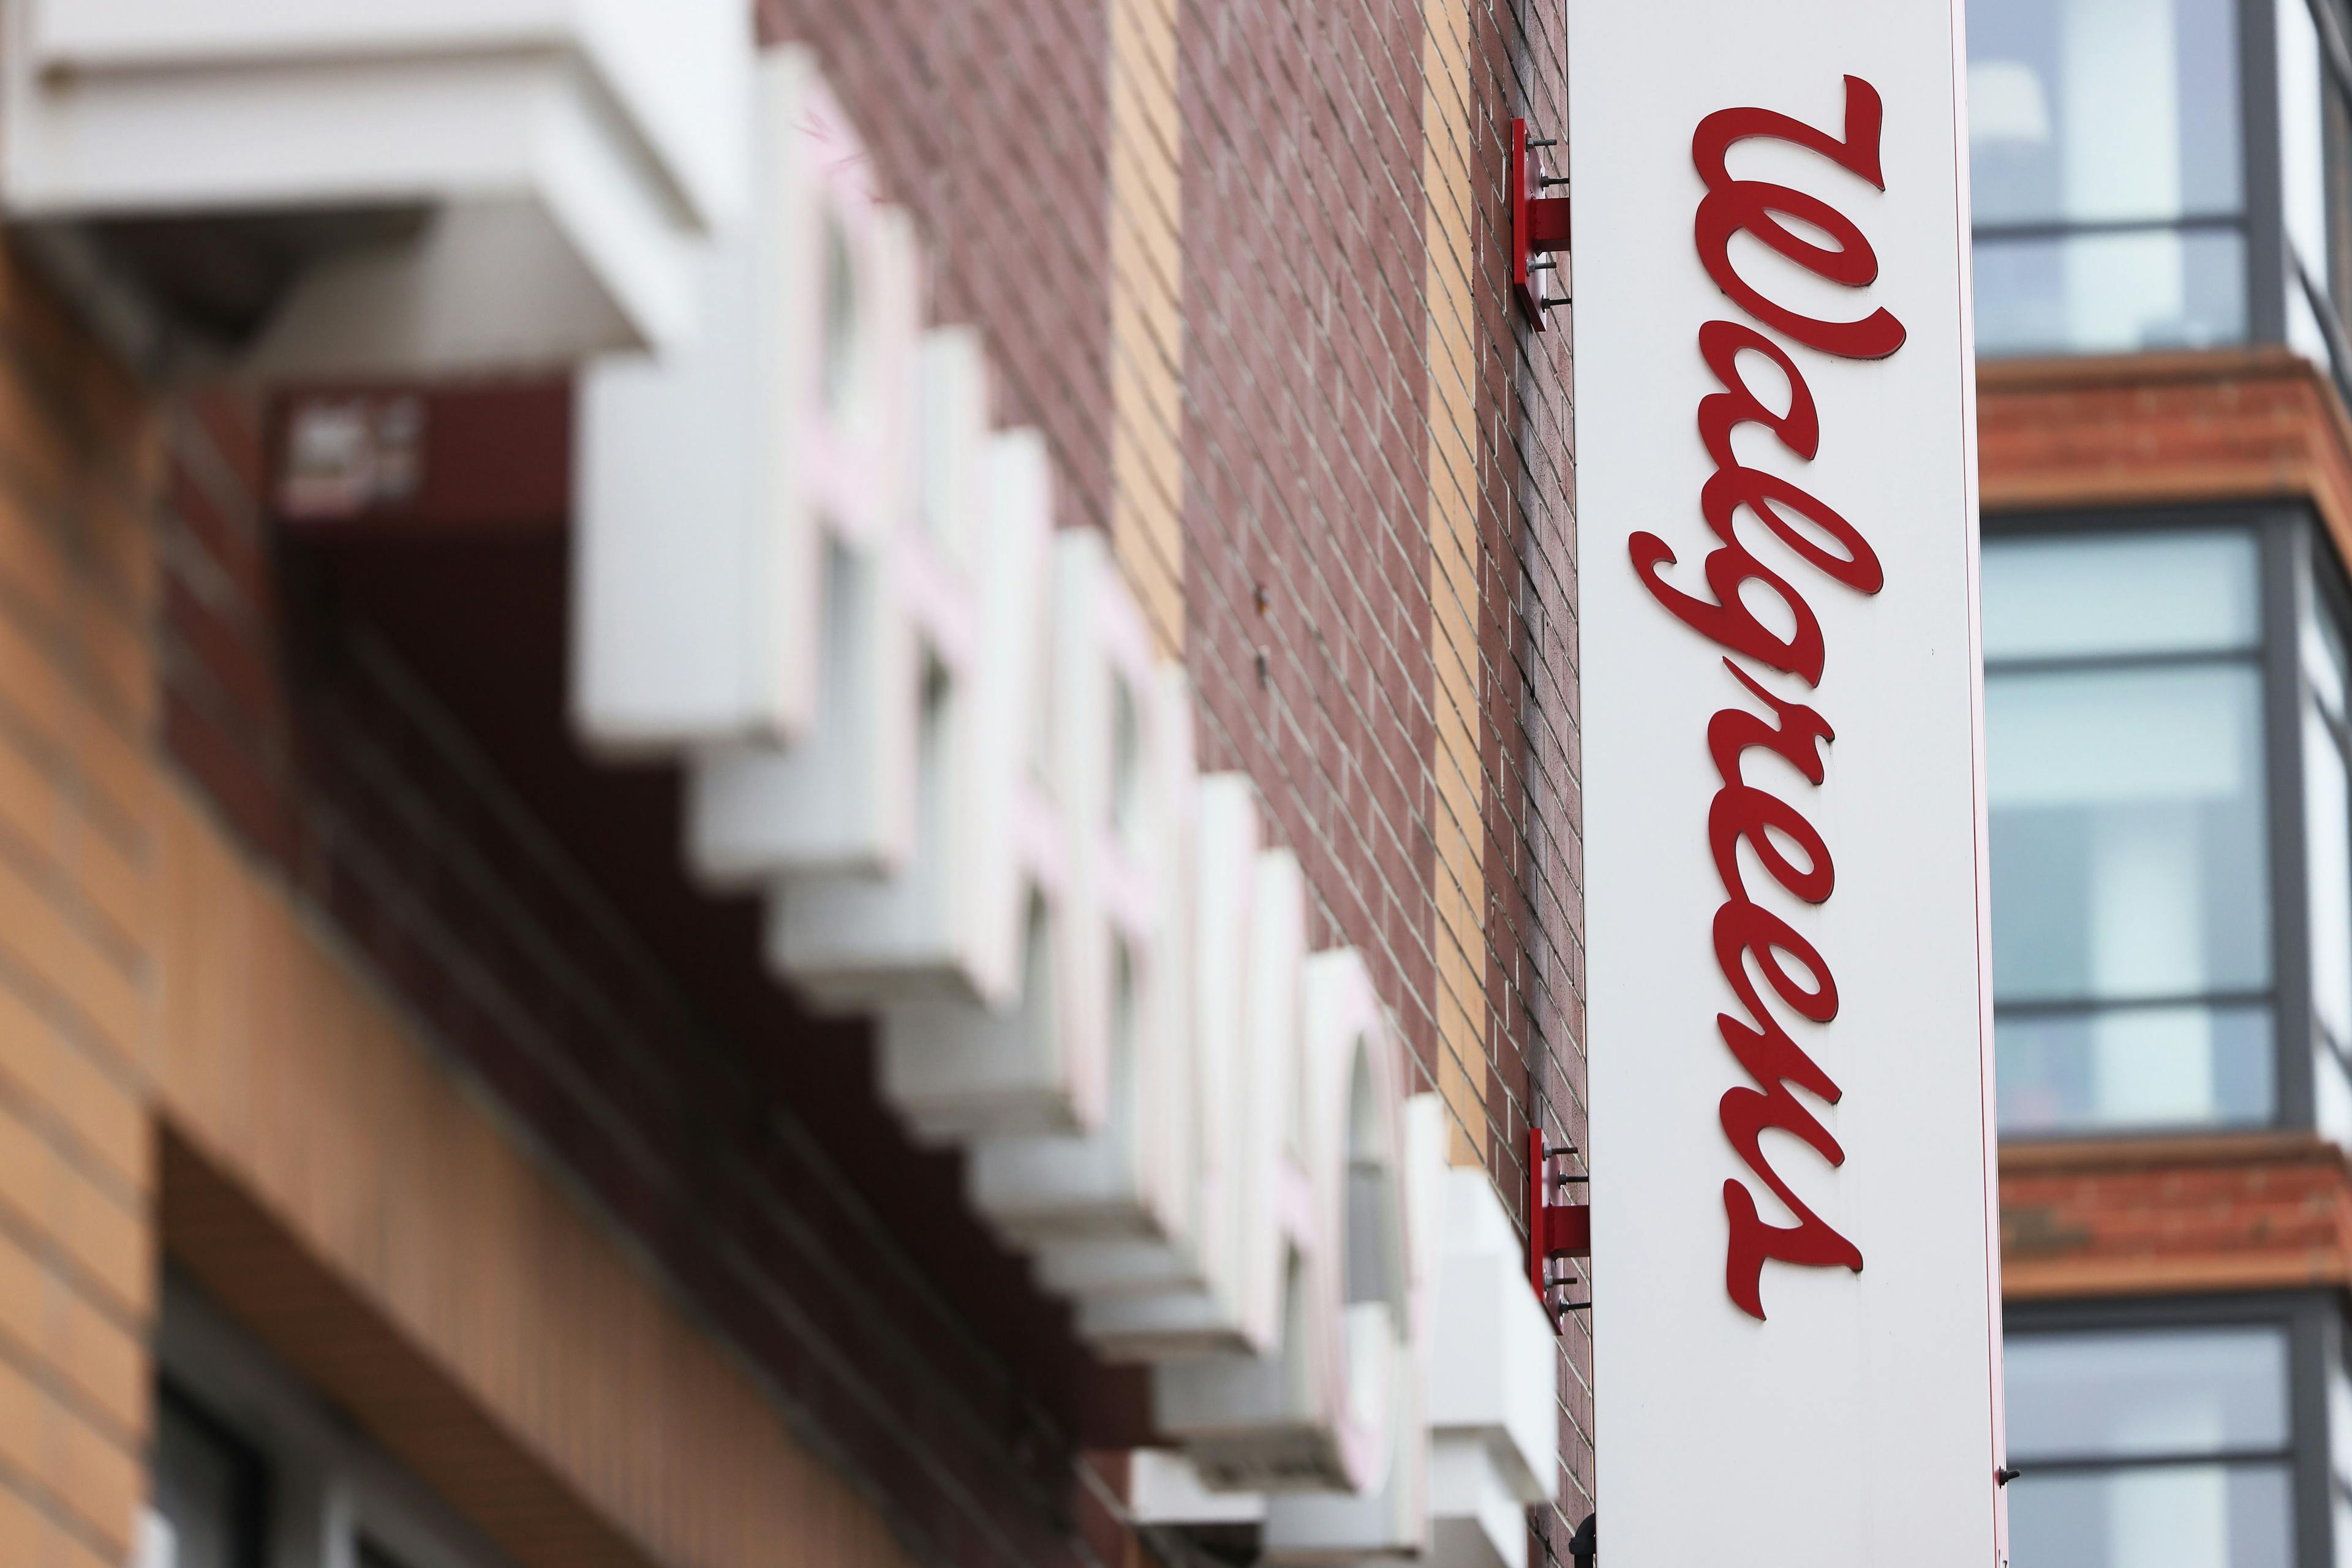 A white Walgreens sign with red writing